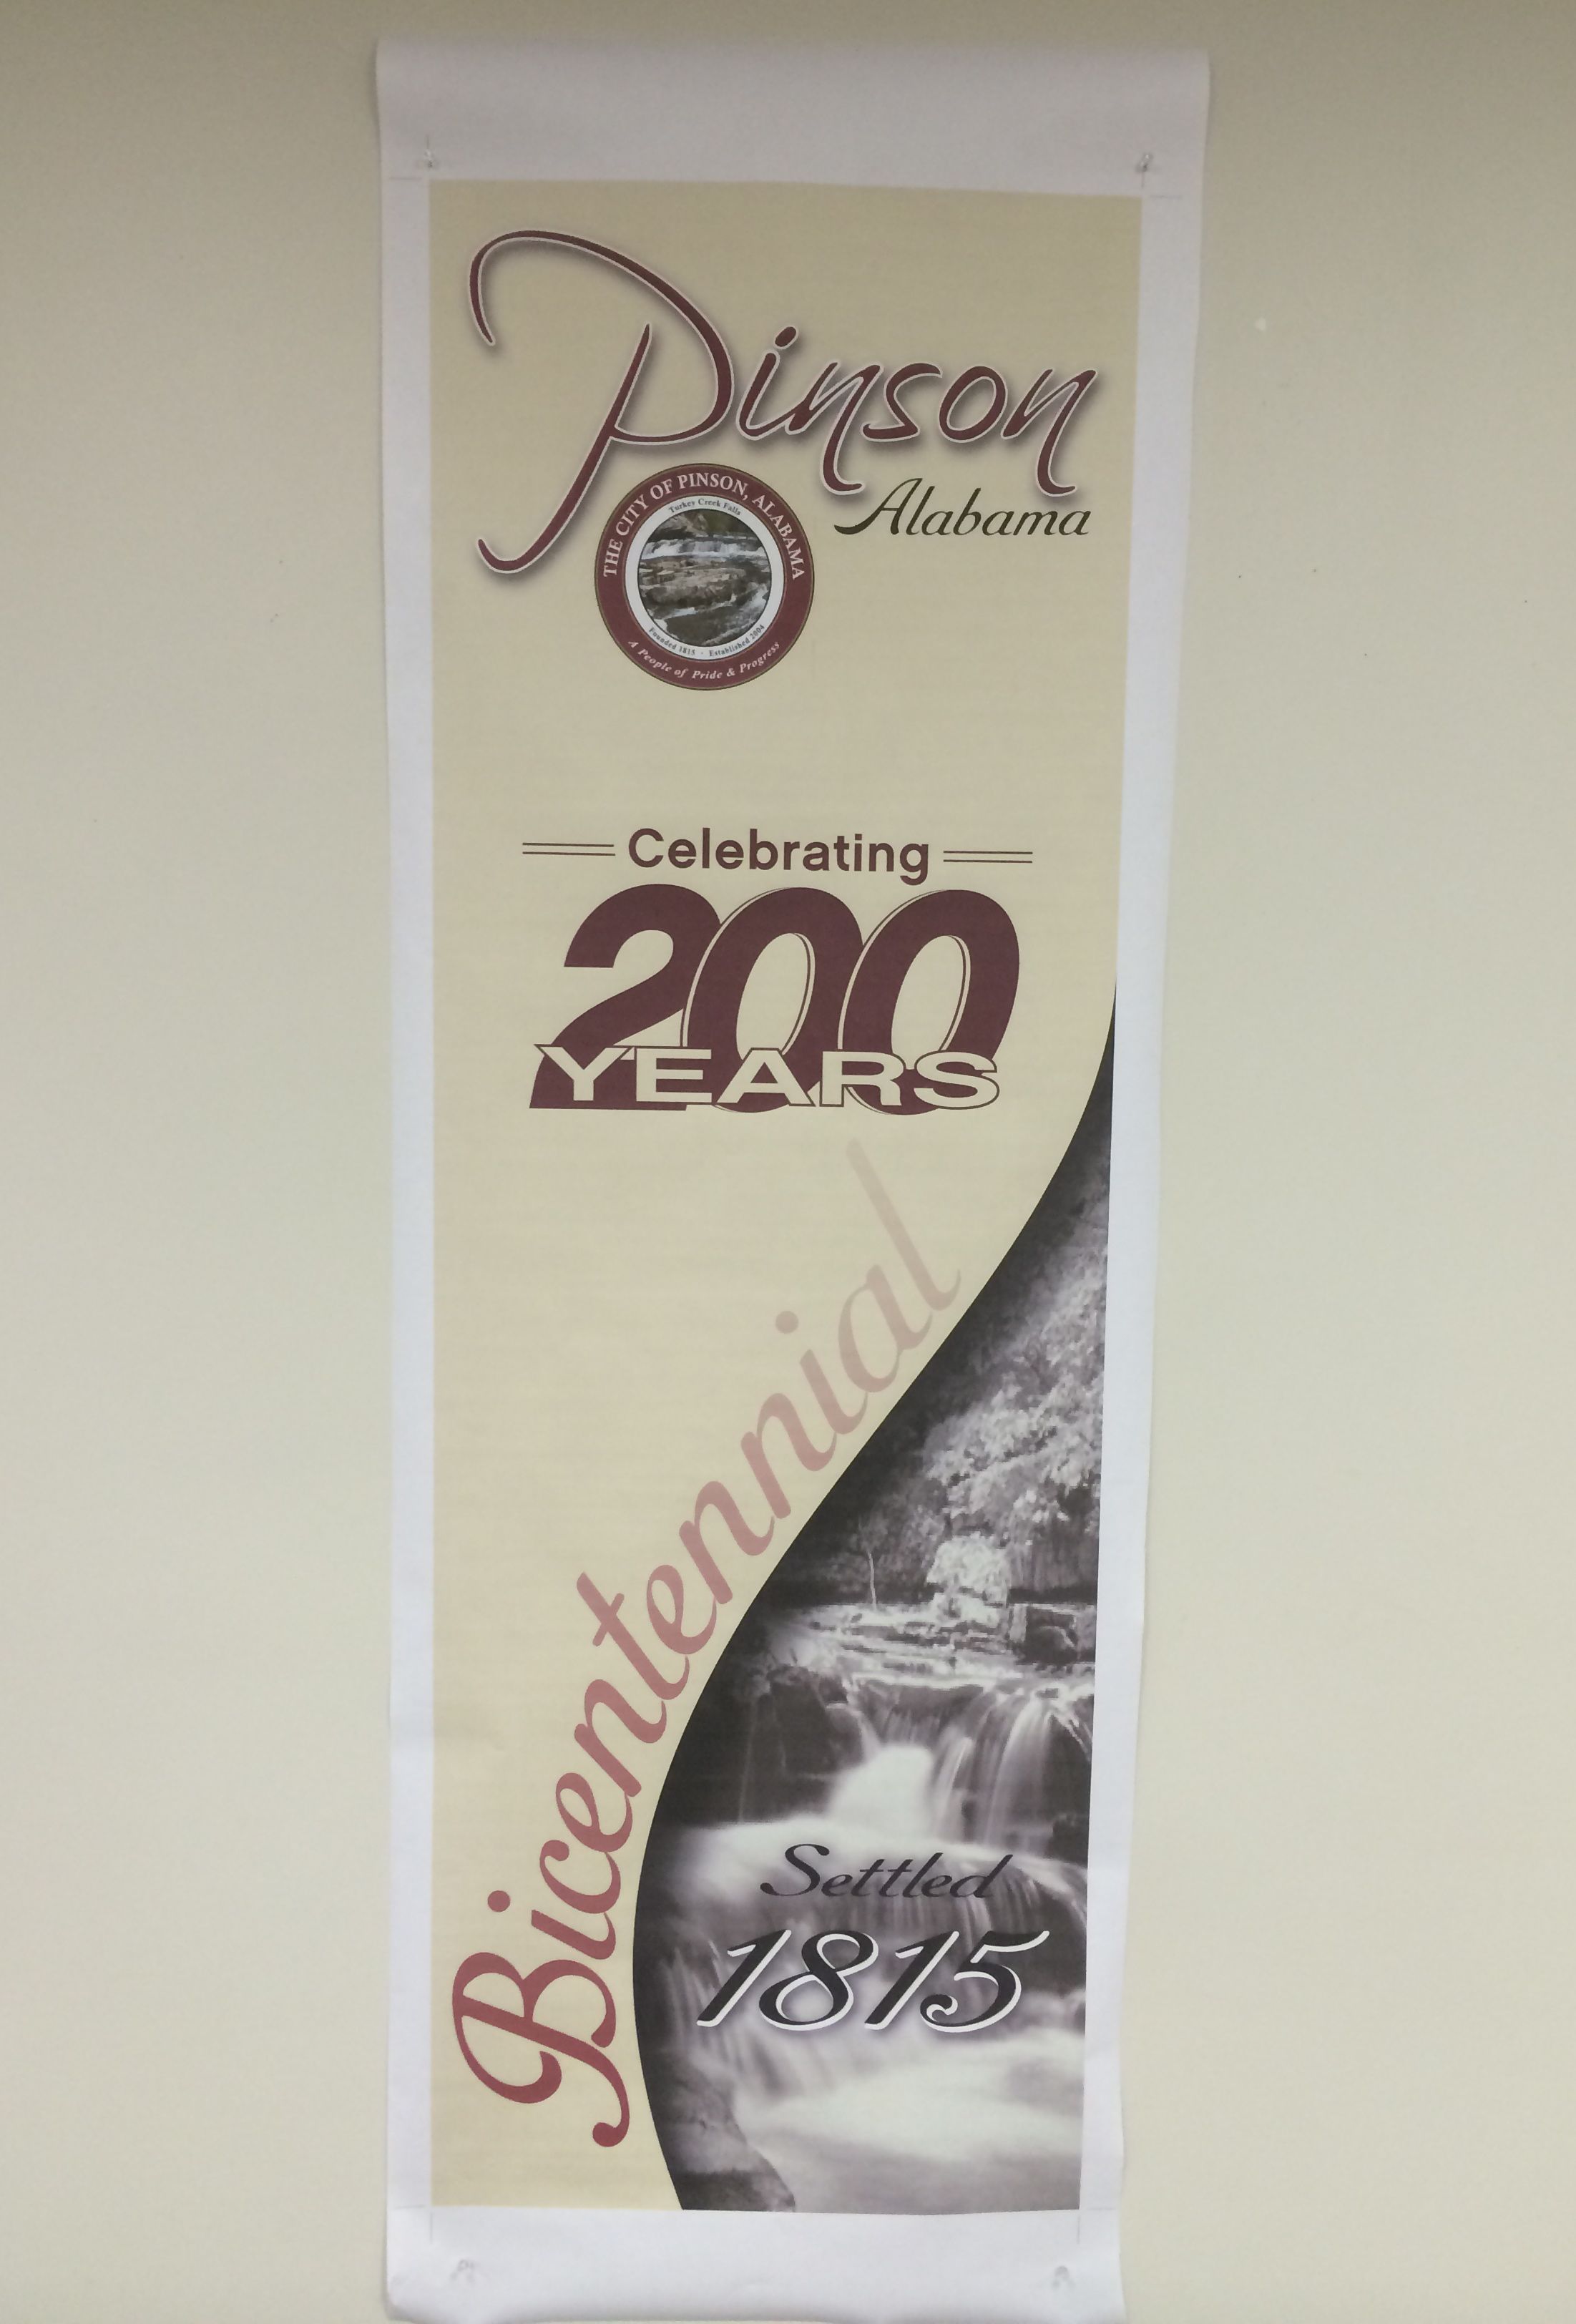 Pinson to order banners celebrating 200 years 